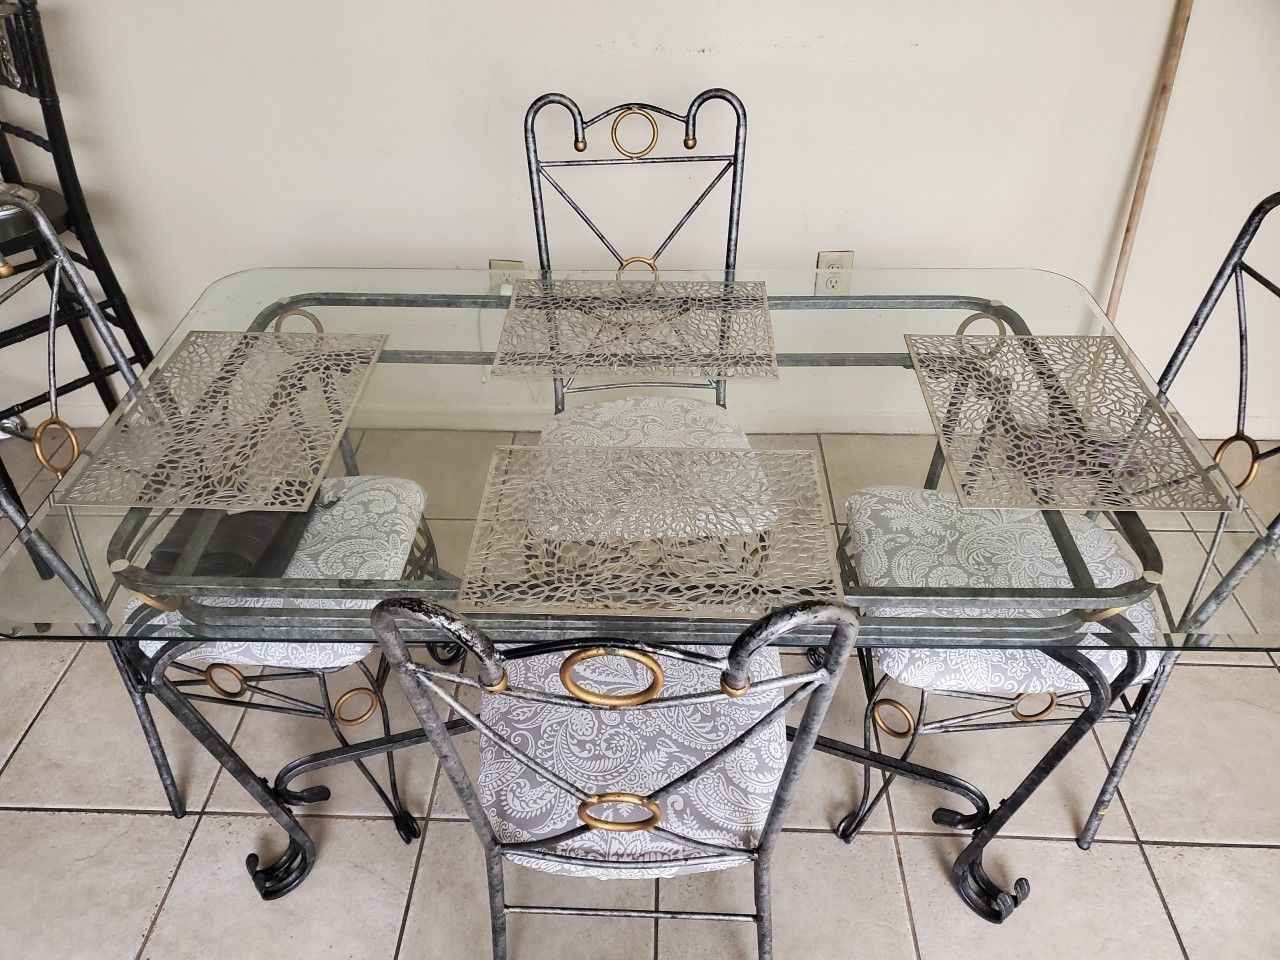 Antique table with chairs